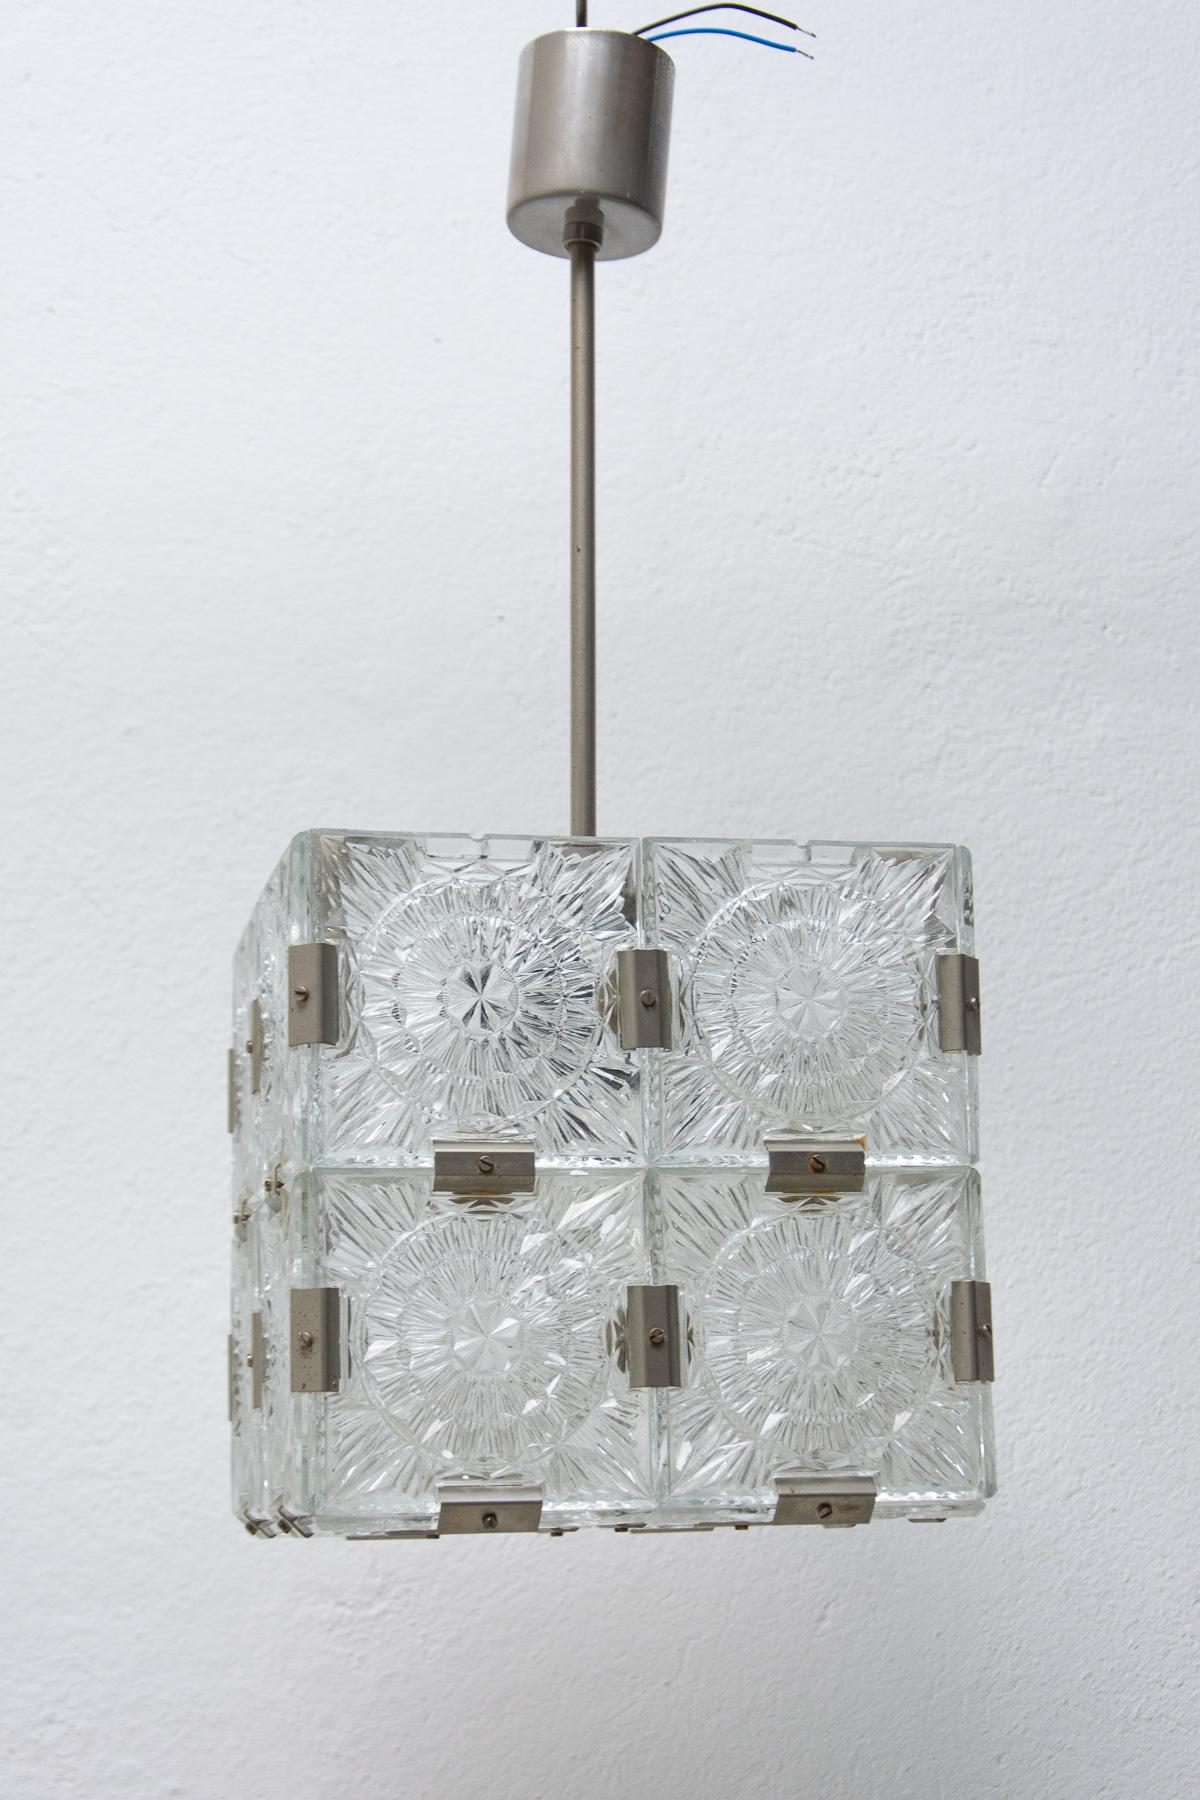 This glass cube hanging lamp was made by Kamenický Šenov company in the 1970’s. Made in the former Czechoslovakia.

Lamp is made of glass and metal. It´s composed of thick textured patterned square cut fetal pieces with chrome fittings. E27 bulb